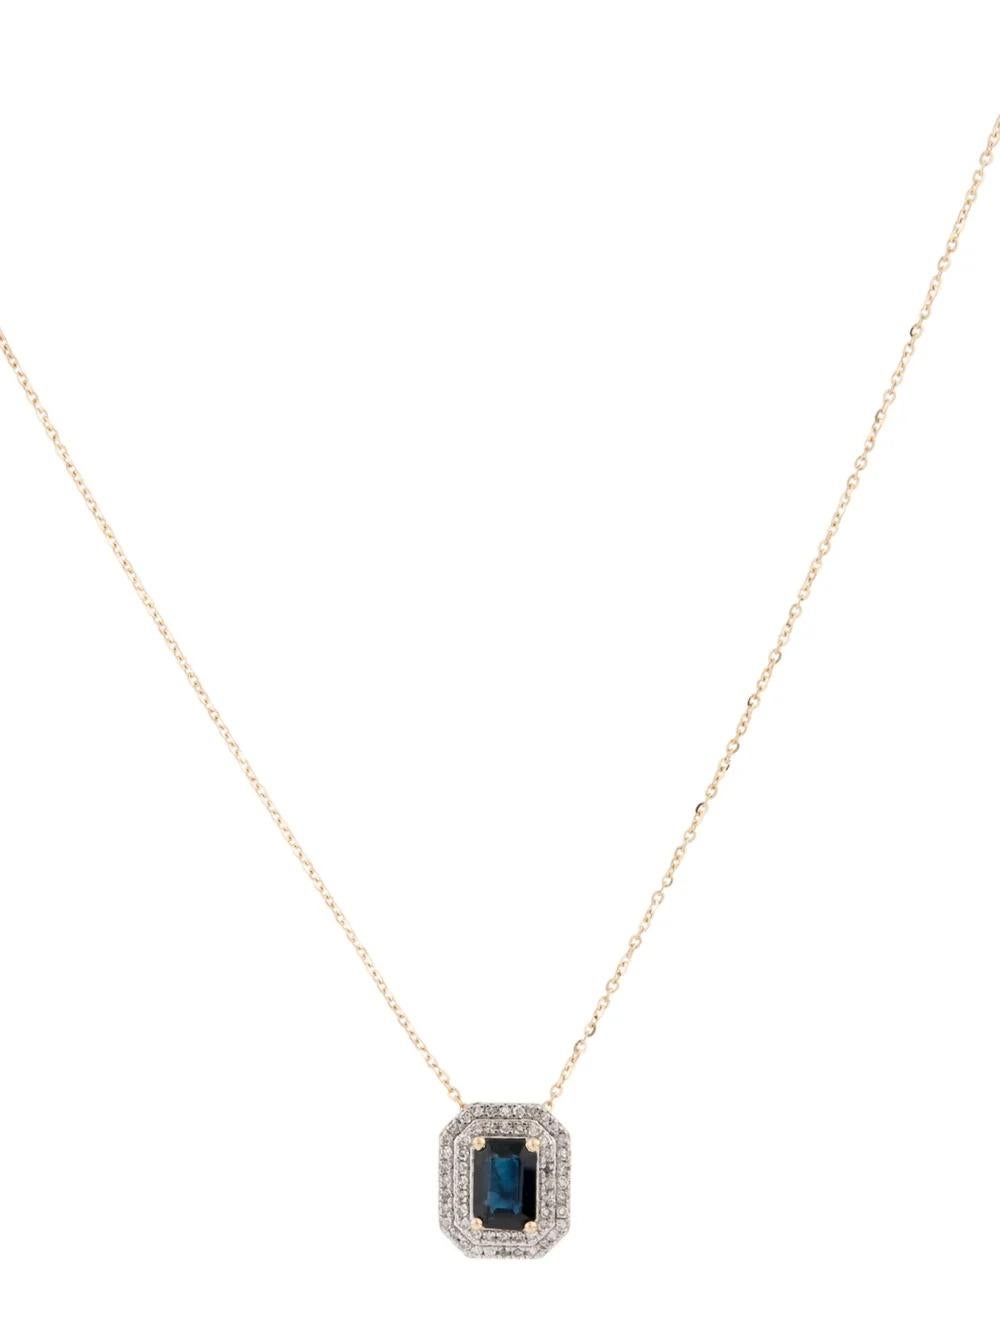 This elegant 14K Yellow Gold Pendant Necklace boasts a stunning Sapphire centerpiece complemented by sparkling Diamonds. 

Specifications:

* Material: 14K Yellow Gold
* Gemstone: Sapphire
* Carat Weight: 1.10
* Stone Count: 1
* Stone Shape: Cut